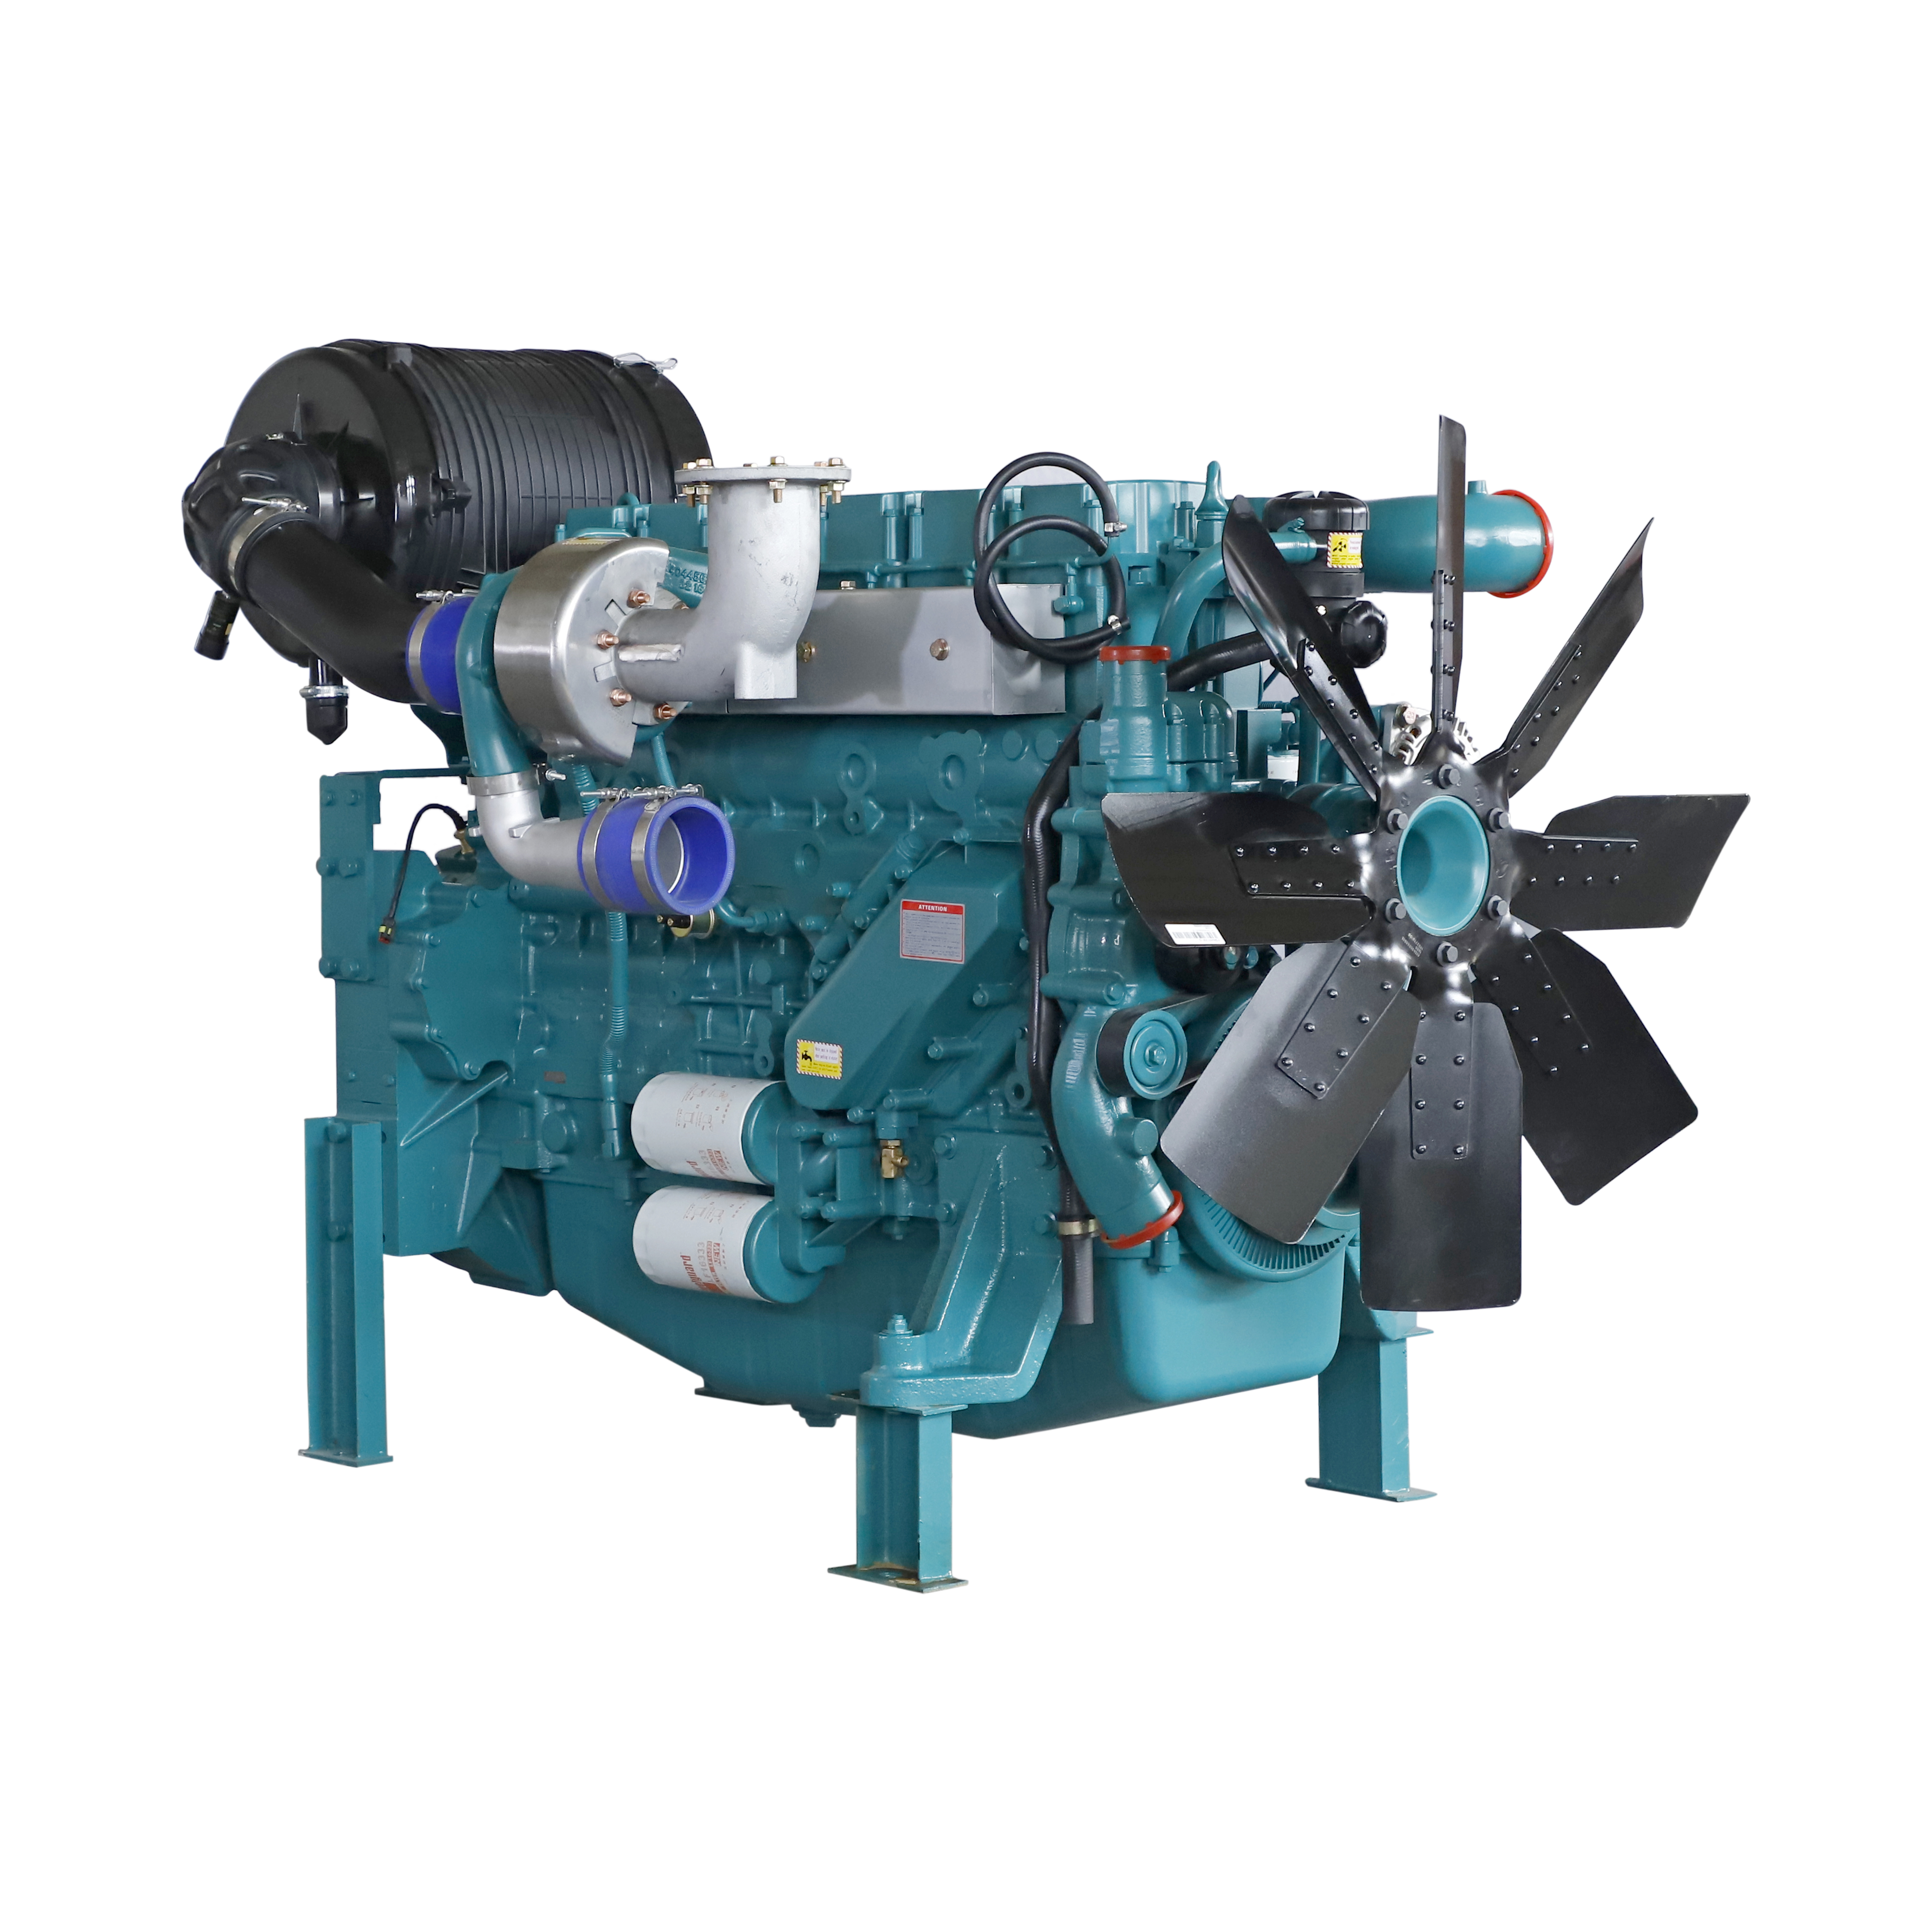 D series diesel engine for electric